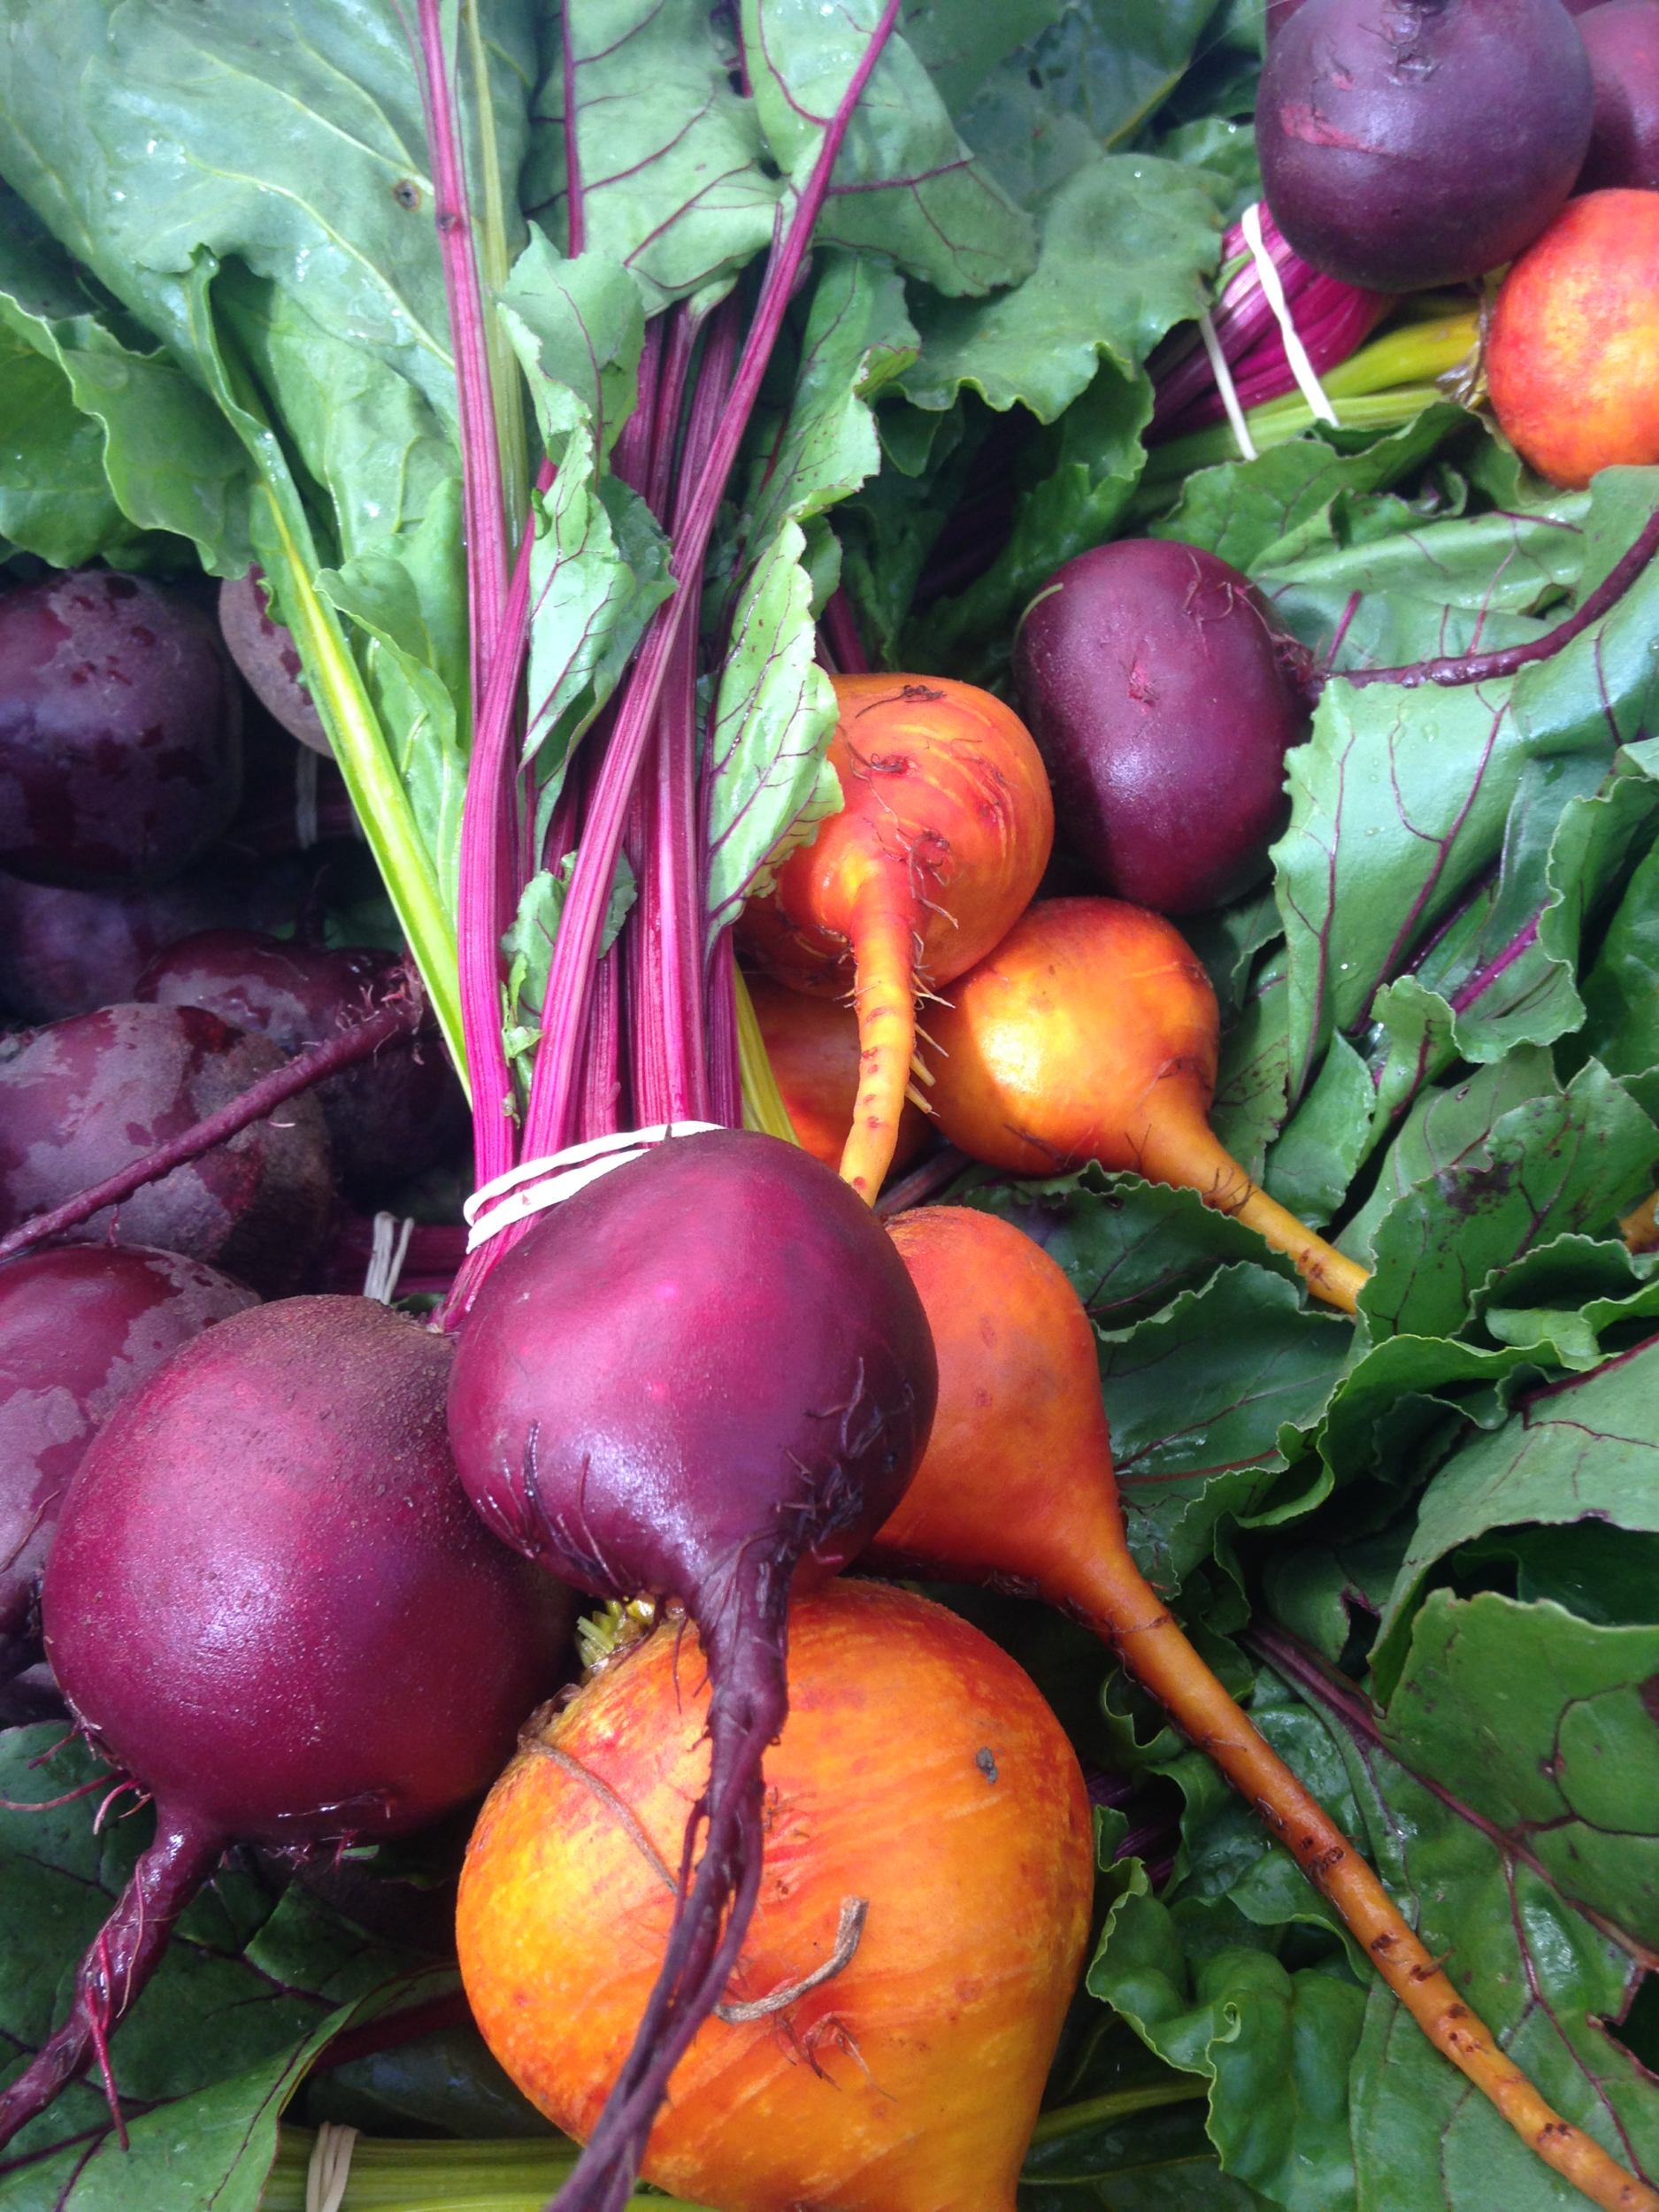 Beetroot and yellow beets